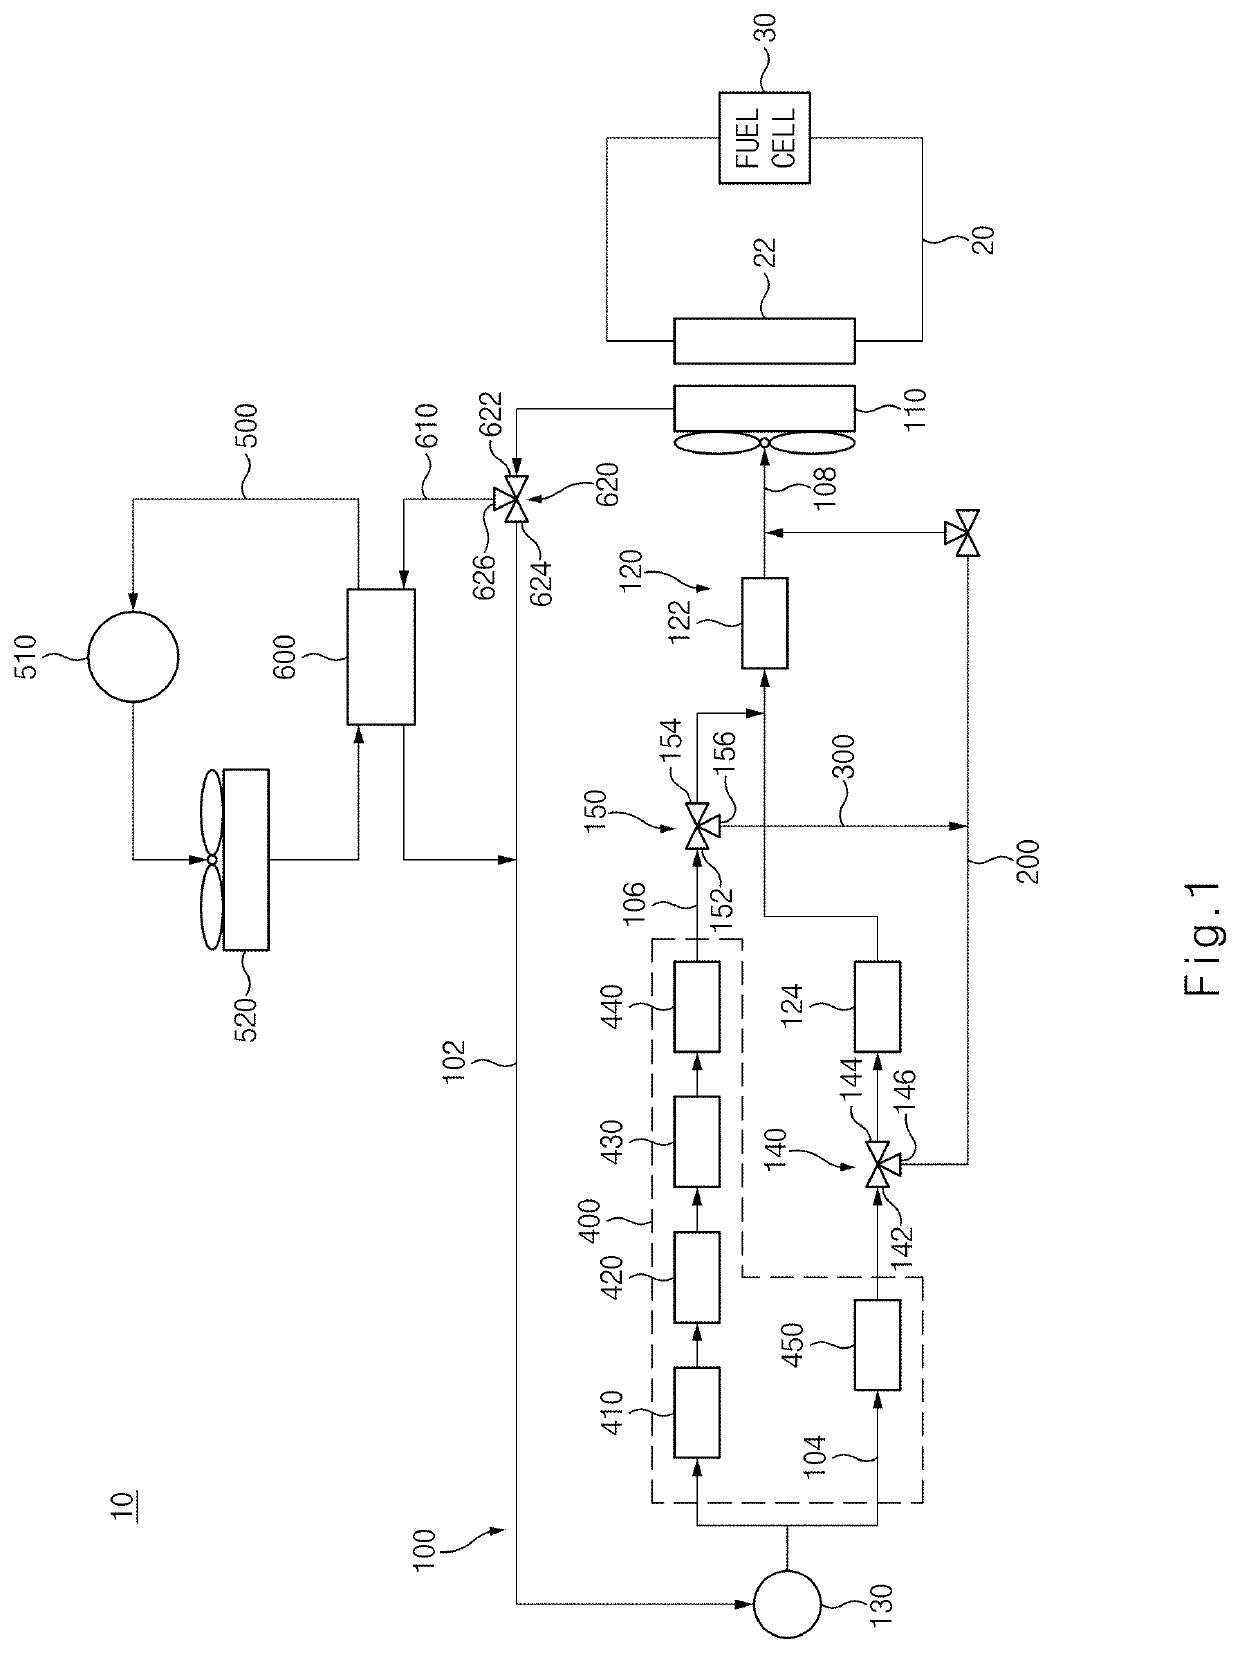 Thermal management system for fuel cell vehicle